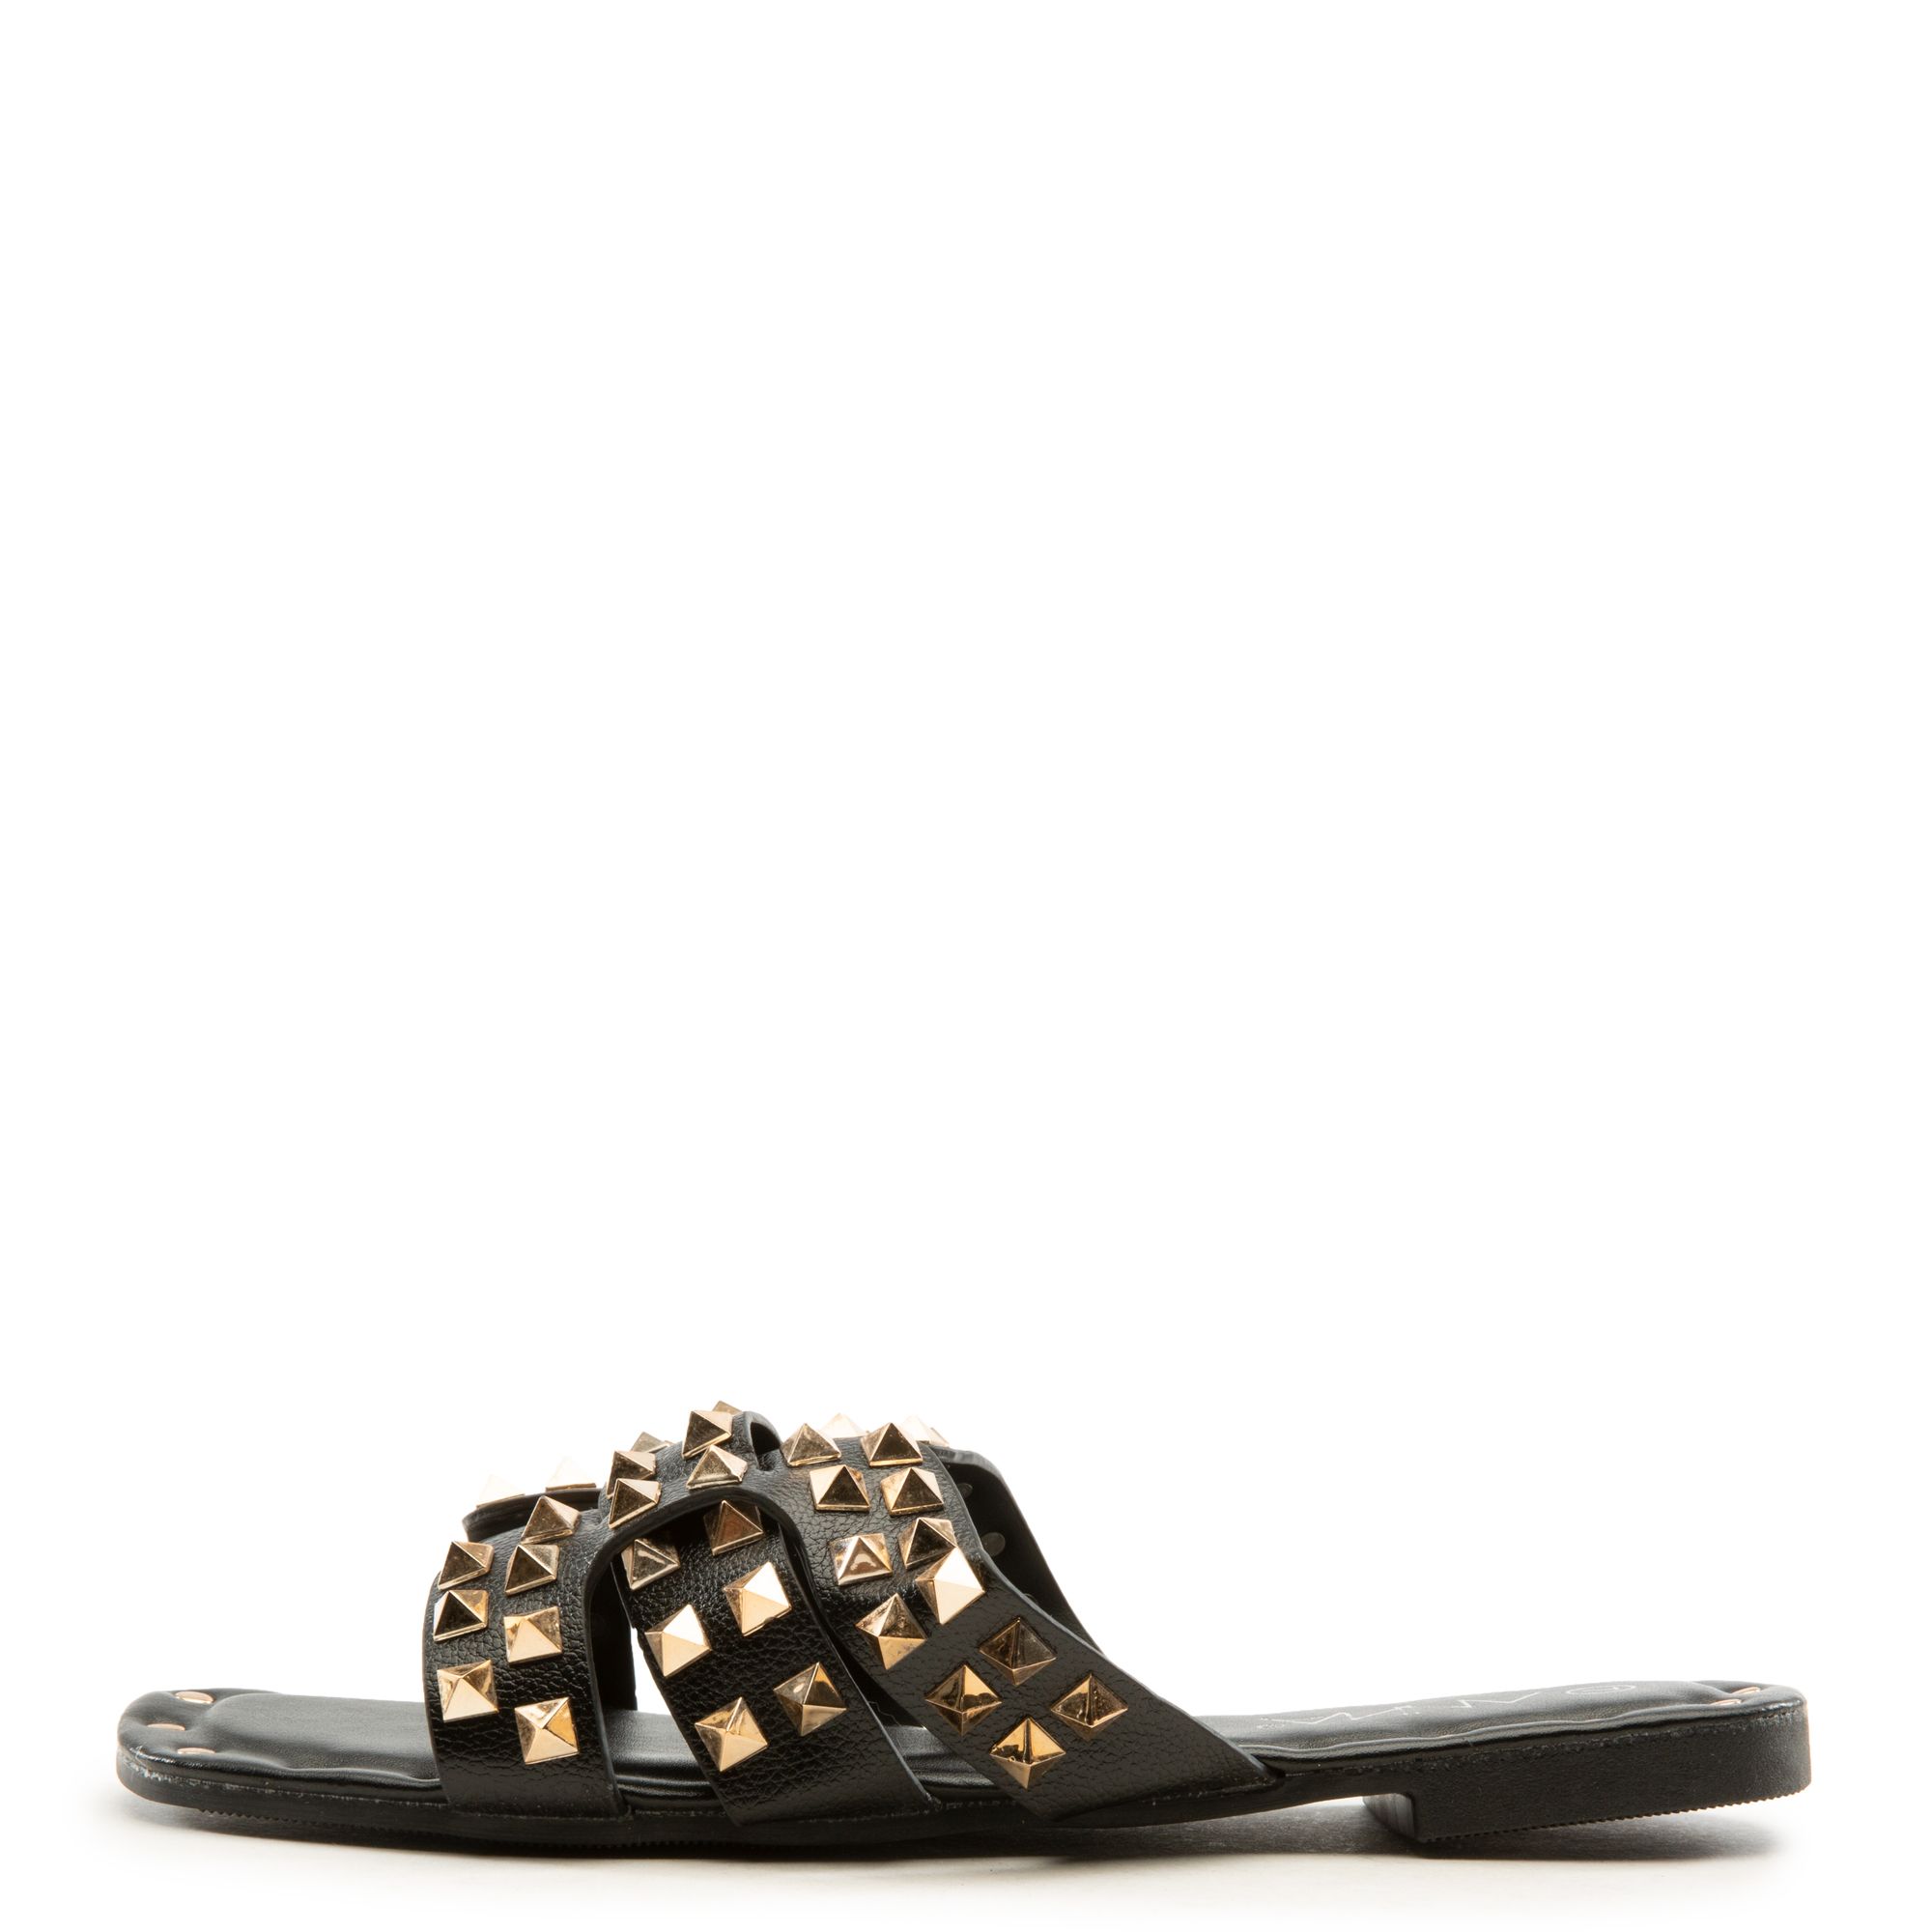 ANNA SHOES Spikky-6 Studded Flat Sandals SPIKKY-6-BLK - Shiekh